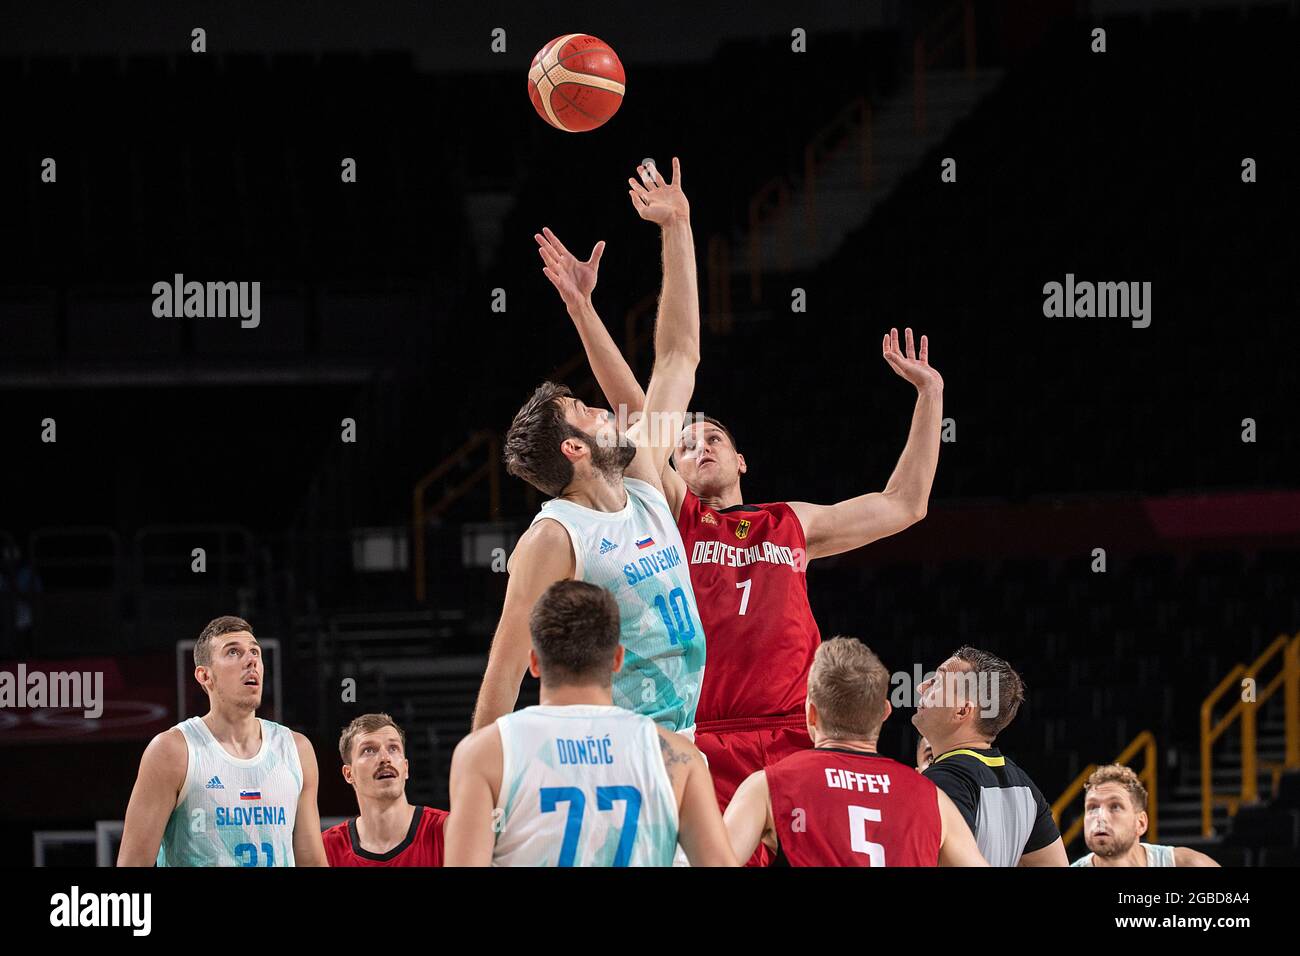 Johannes VOIGTMANN (GER, Mi., r.) Versus Mike TOBEY (SLO), action, game scene; Basketball/Solwenien (SLO) - Germany (GER) 94:70, on August 3rd, 2021; Olympic Summer Games 2020, from 23.07. - 08.08.2021 in Tokyo/Japan. Stock Photo